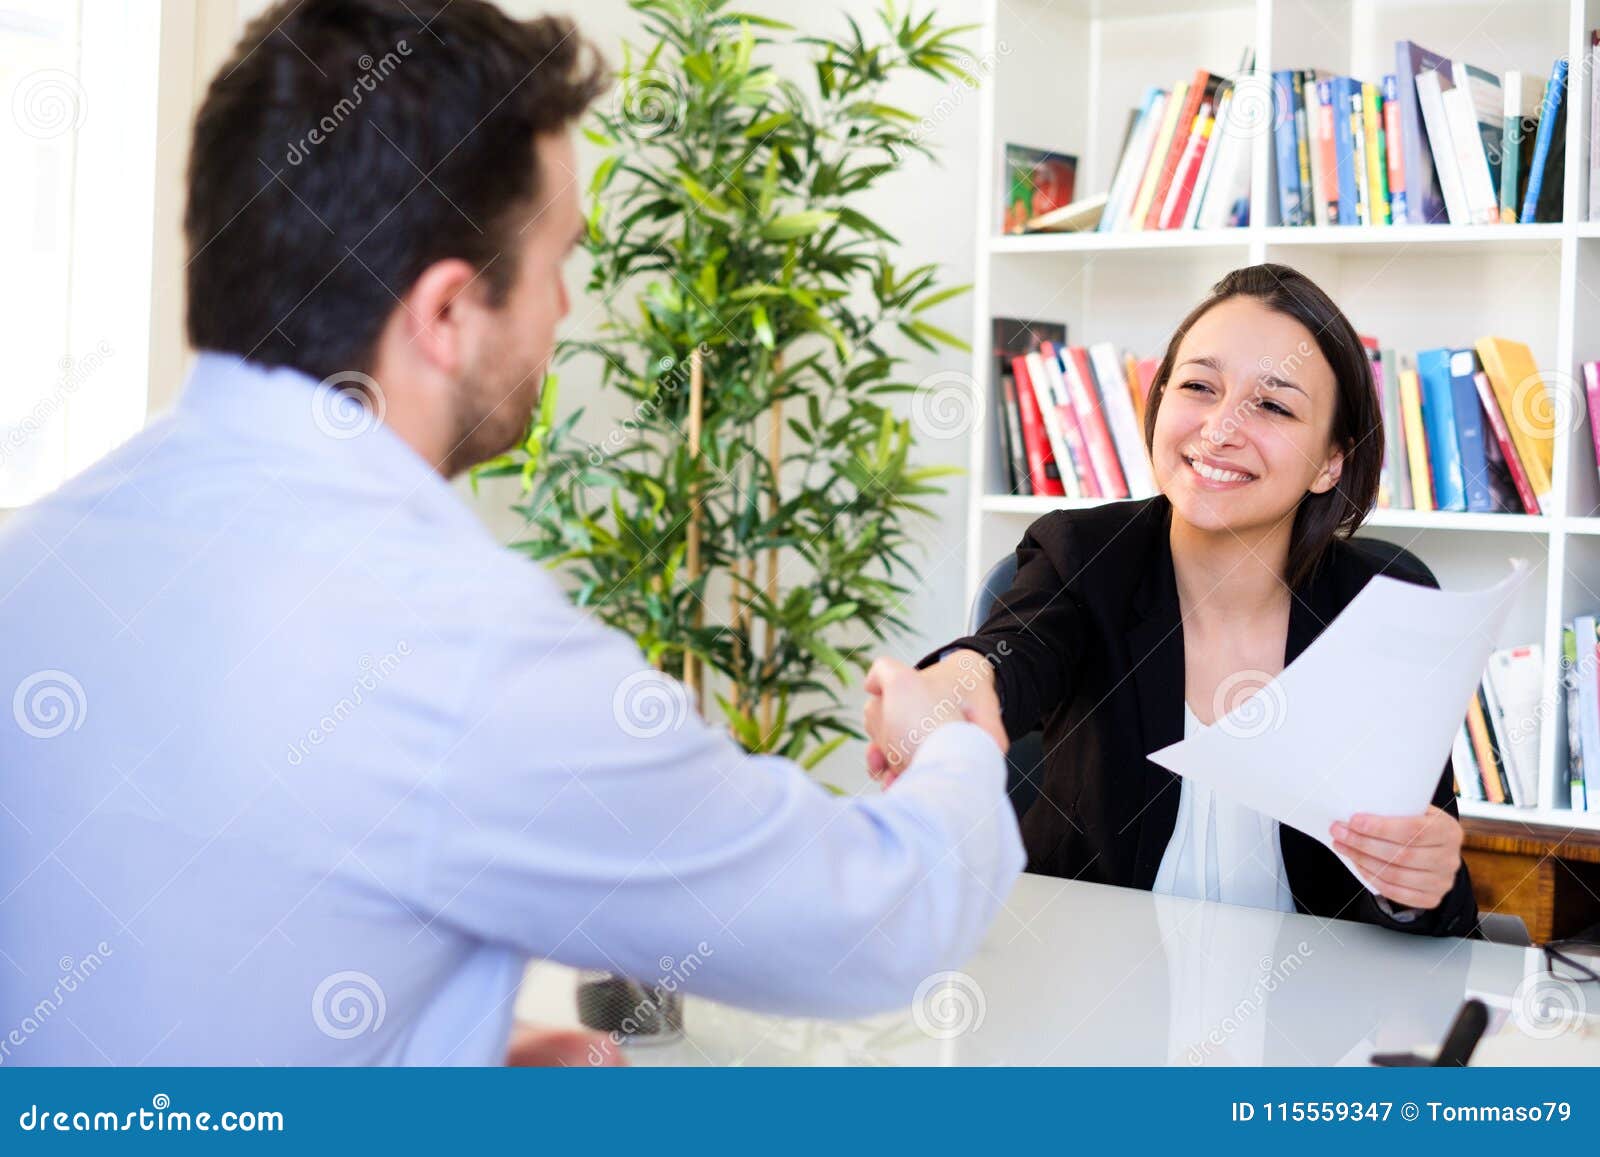 handshake after successful job interview and cv